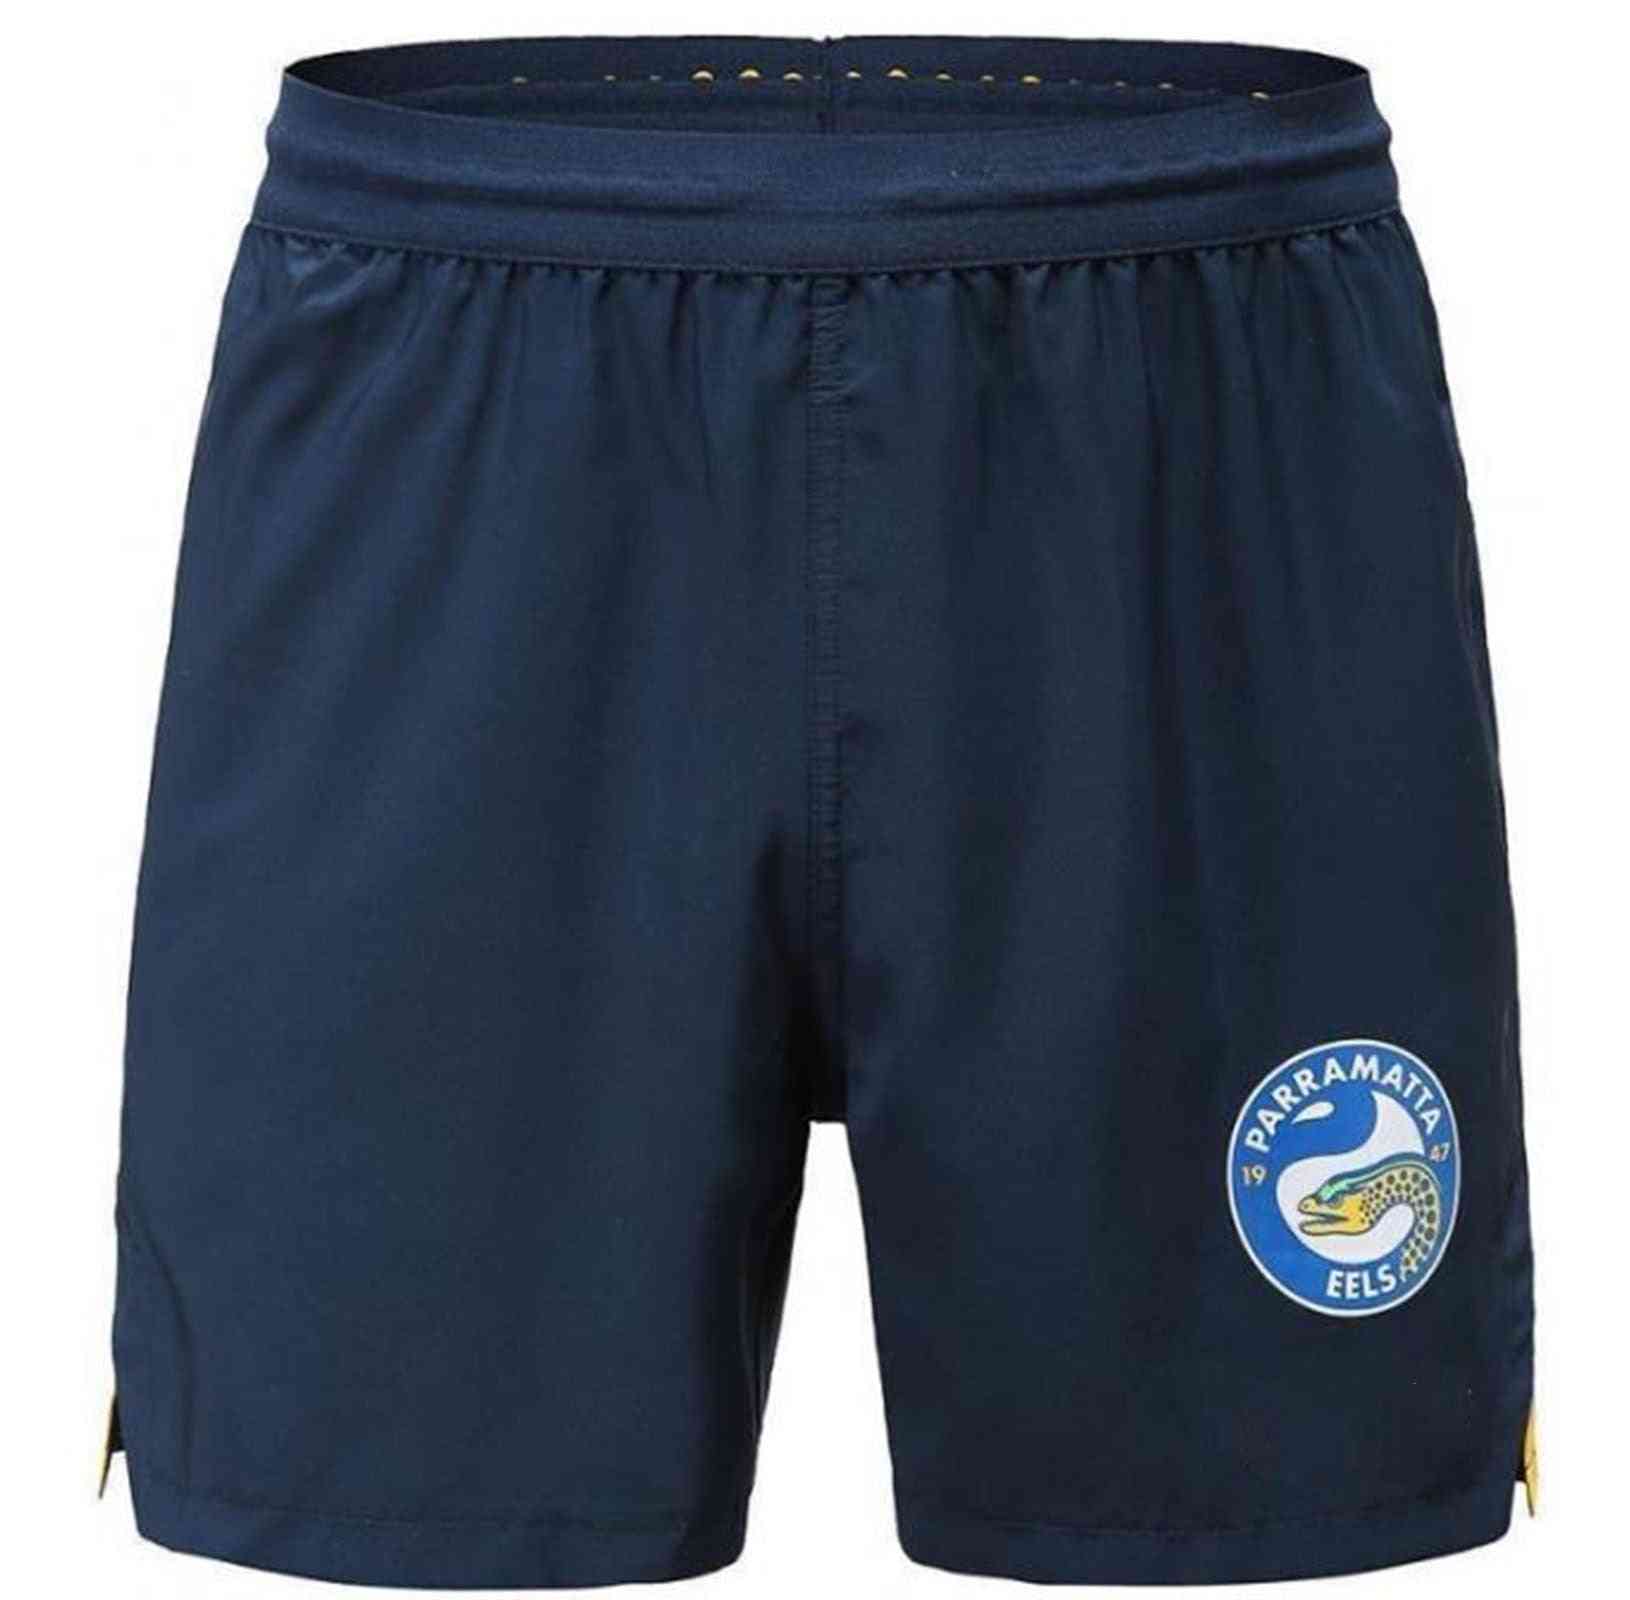 Cowboys Knight Rugby Jersey Shorts